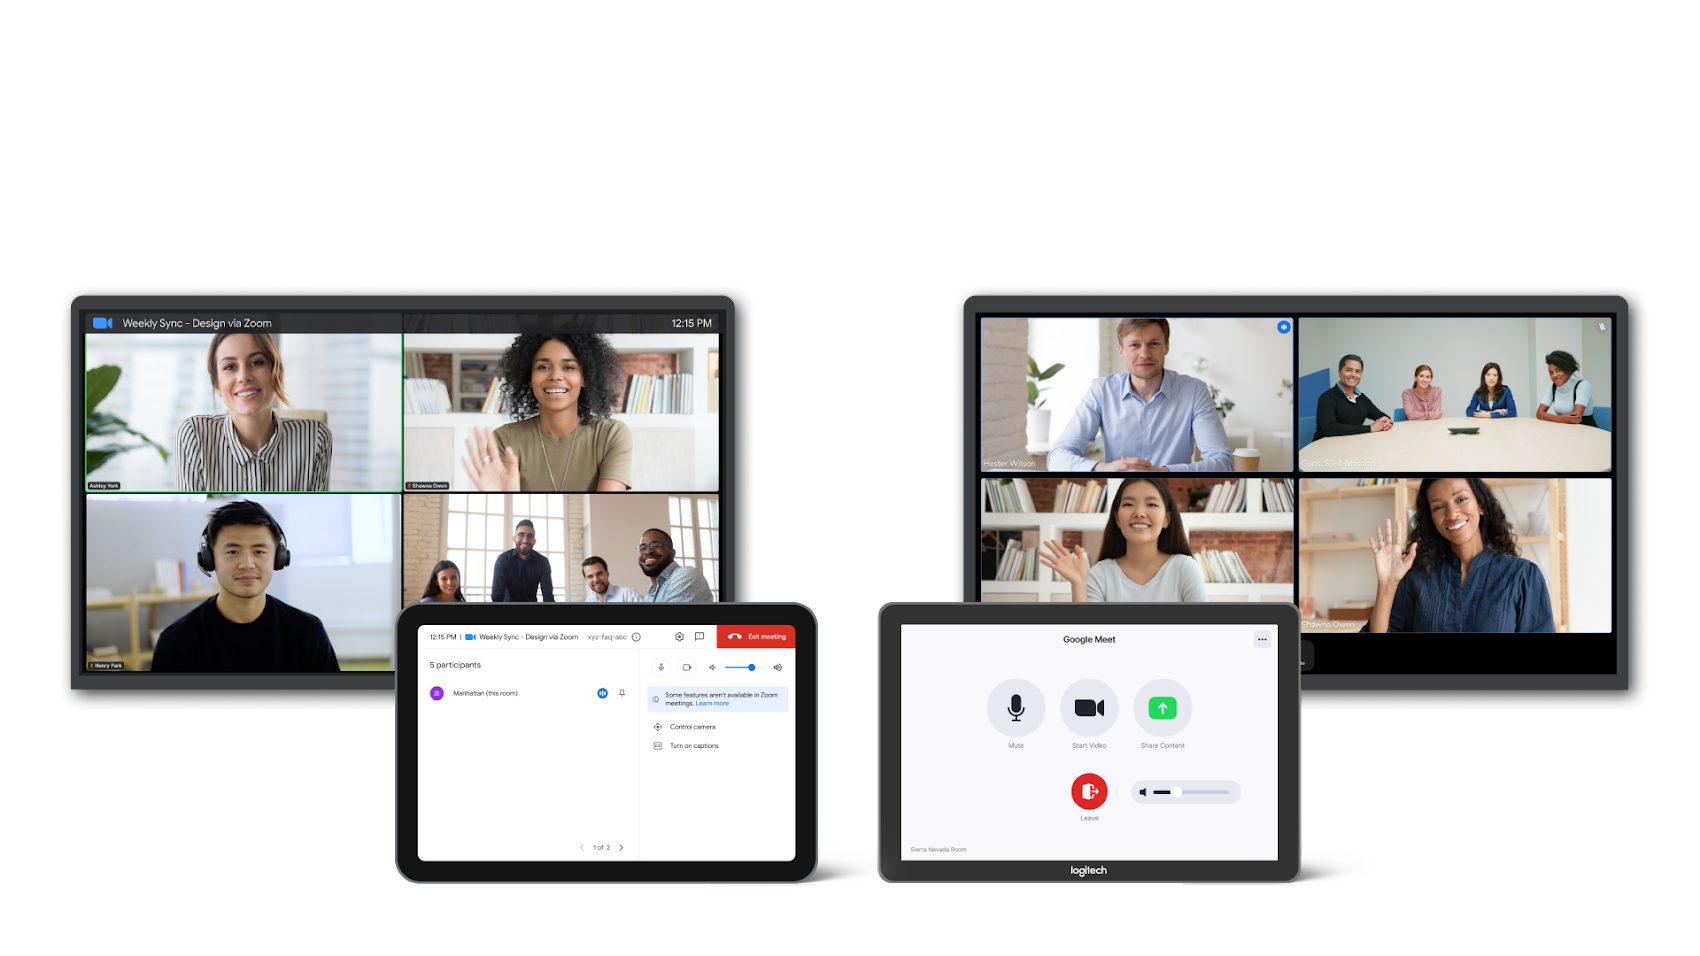 Zoom users will be able to join Meet video calls and vice versa.